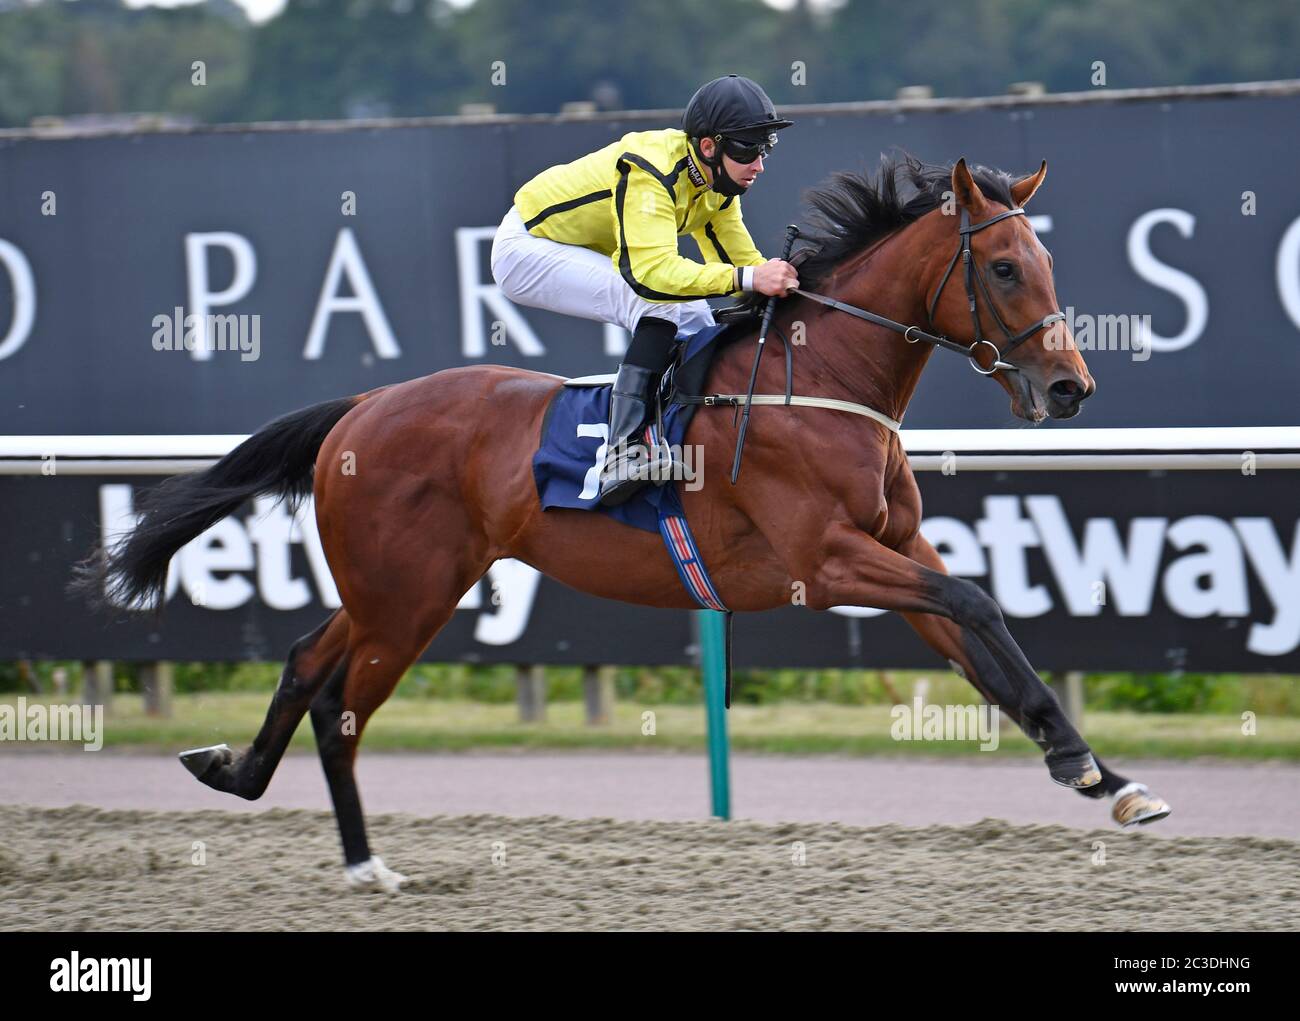 Rommel ridden by Charlie Bishop wins the Betway Maiden Auction Stakes at Lingfield Park Racecourse. Stock Photo